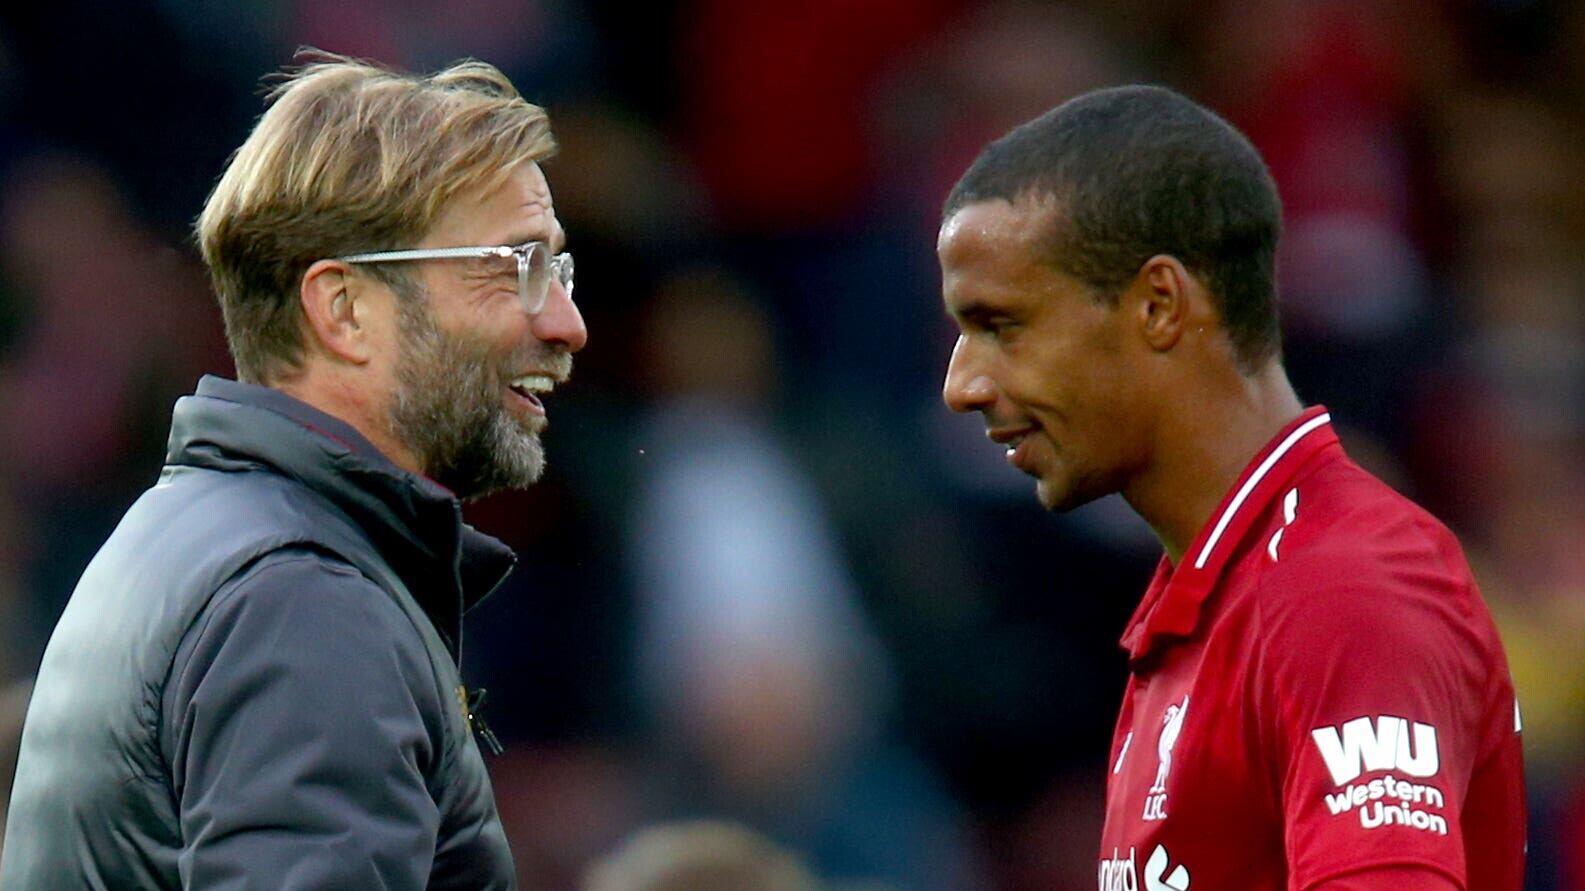 Jurgen Klopp says Liverpool will make do with four centre-backs while Joel Matip is injured (Dave Thompson/PA)